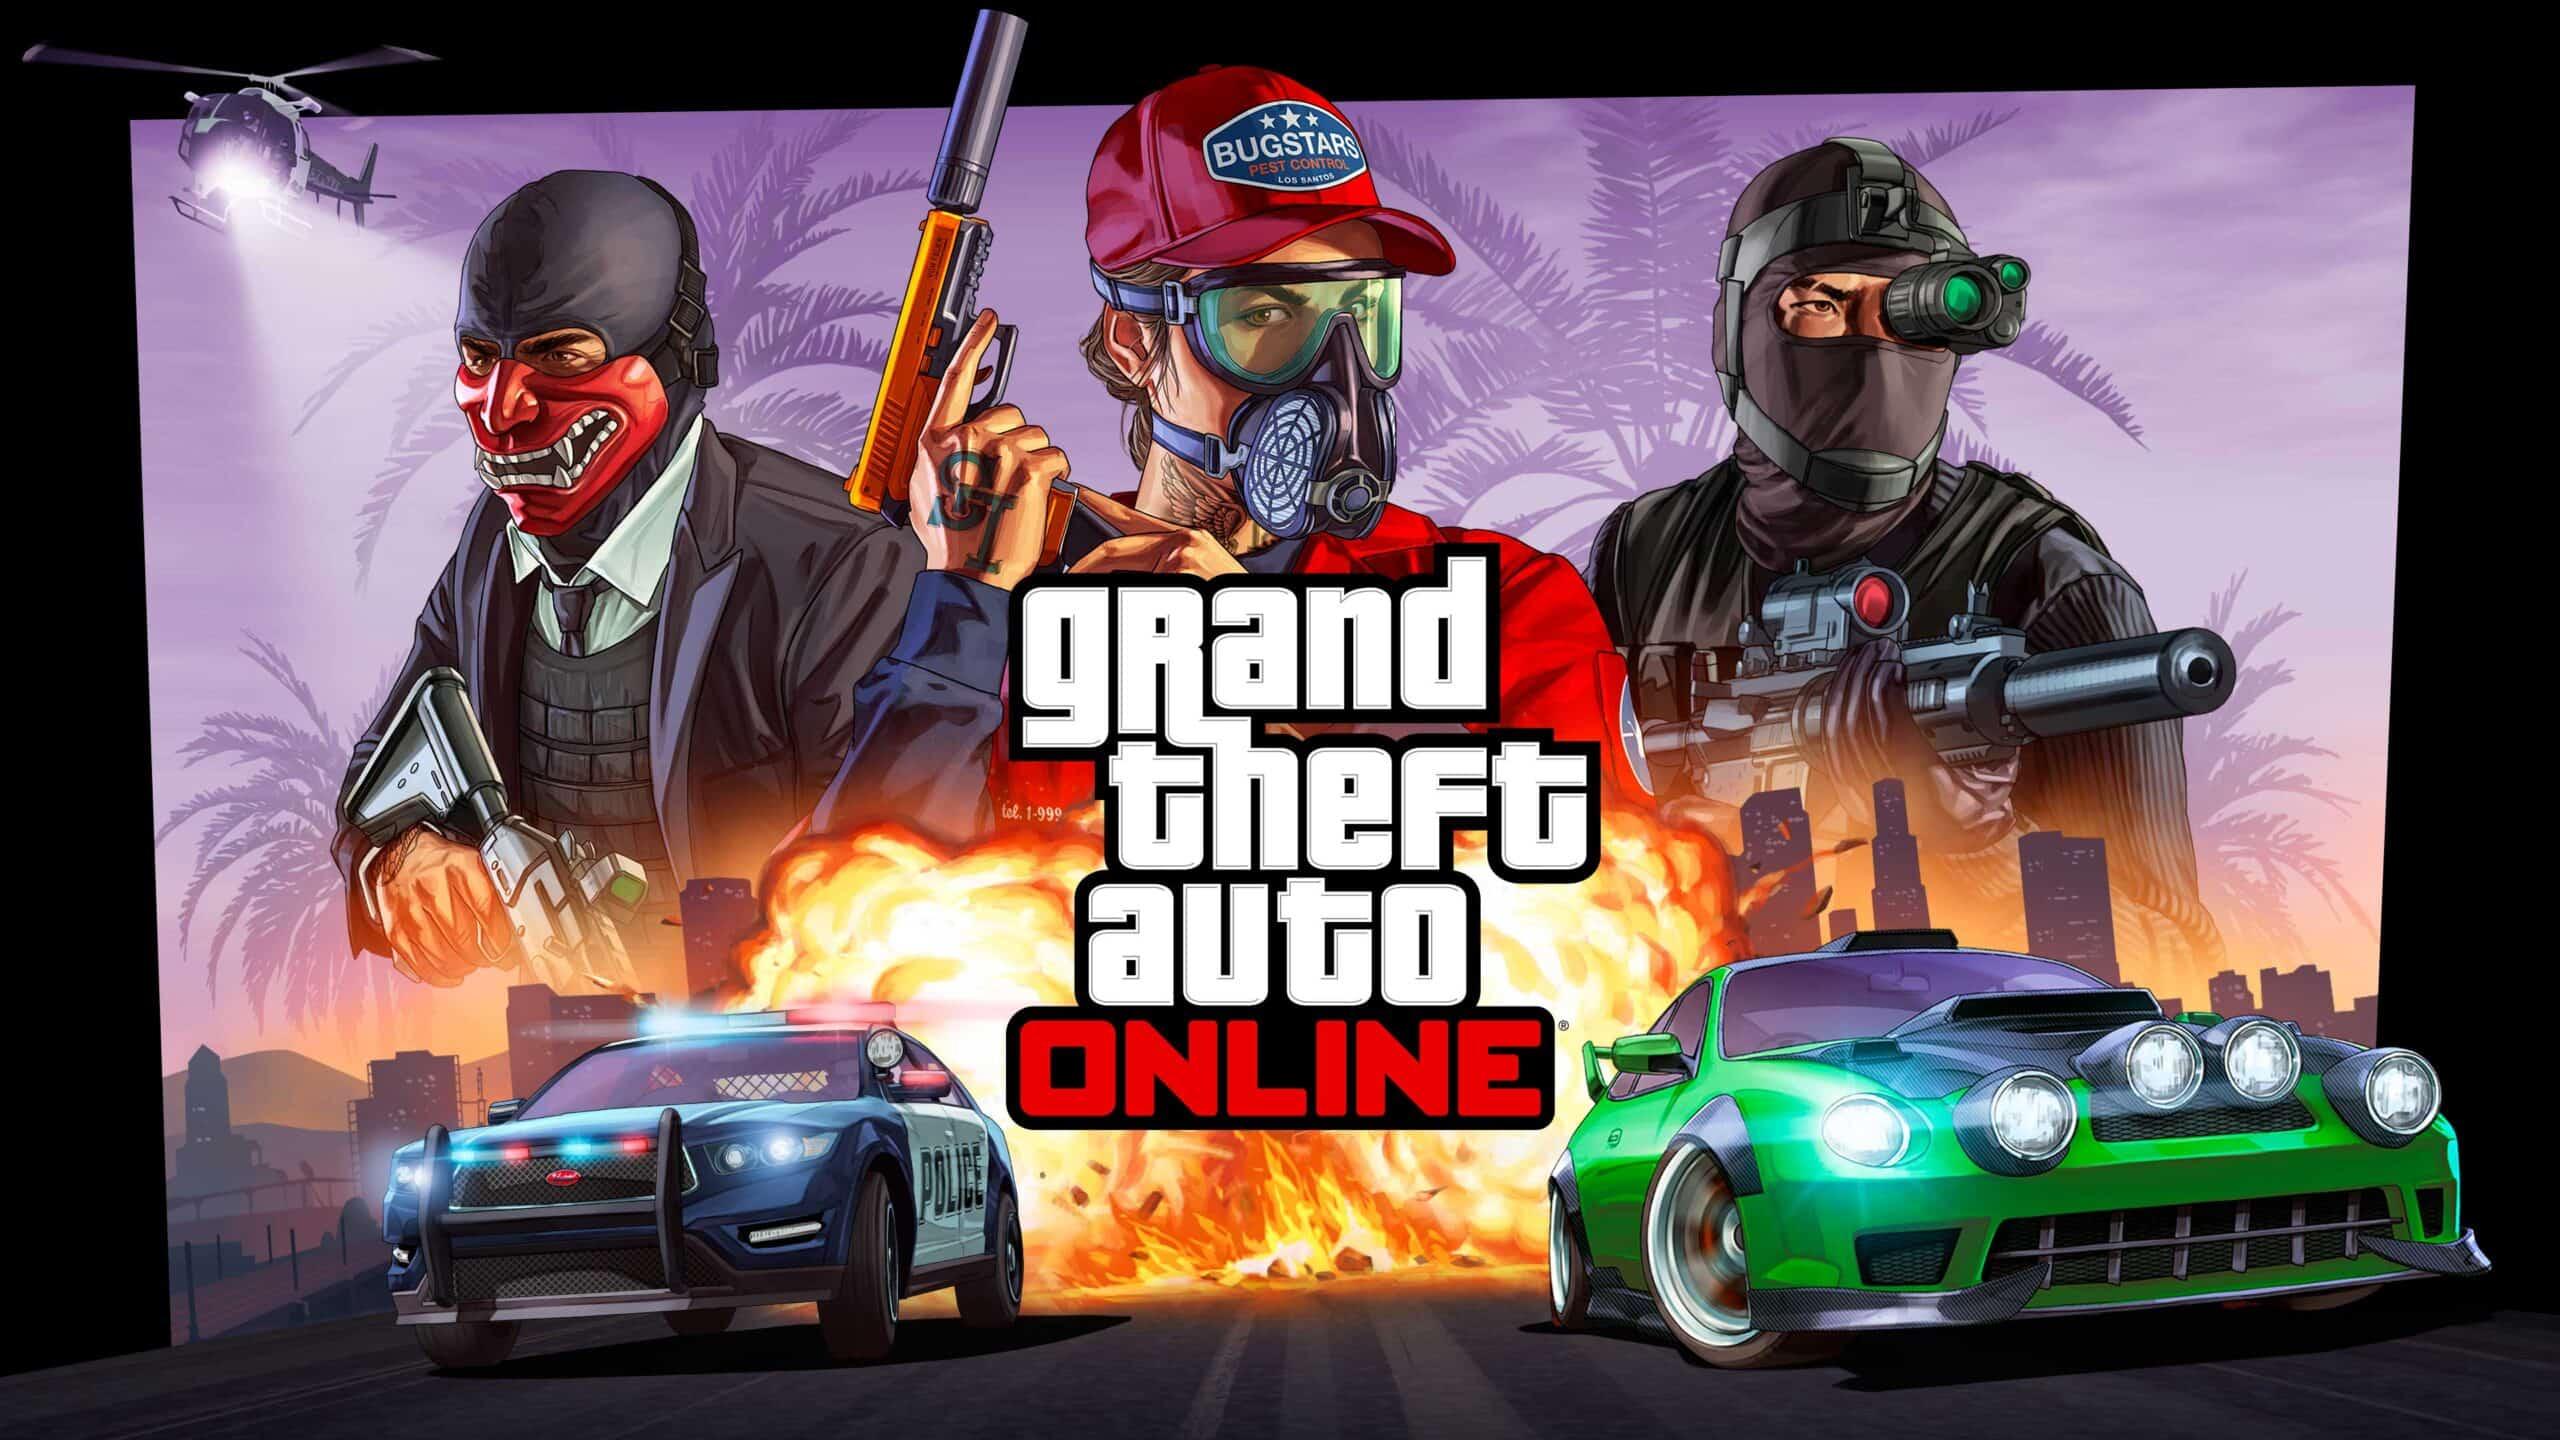 A promotional image for Grand Theft Auto Online.